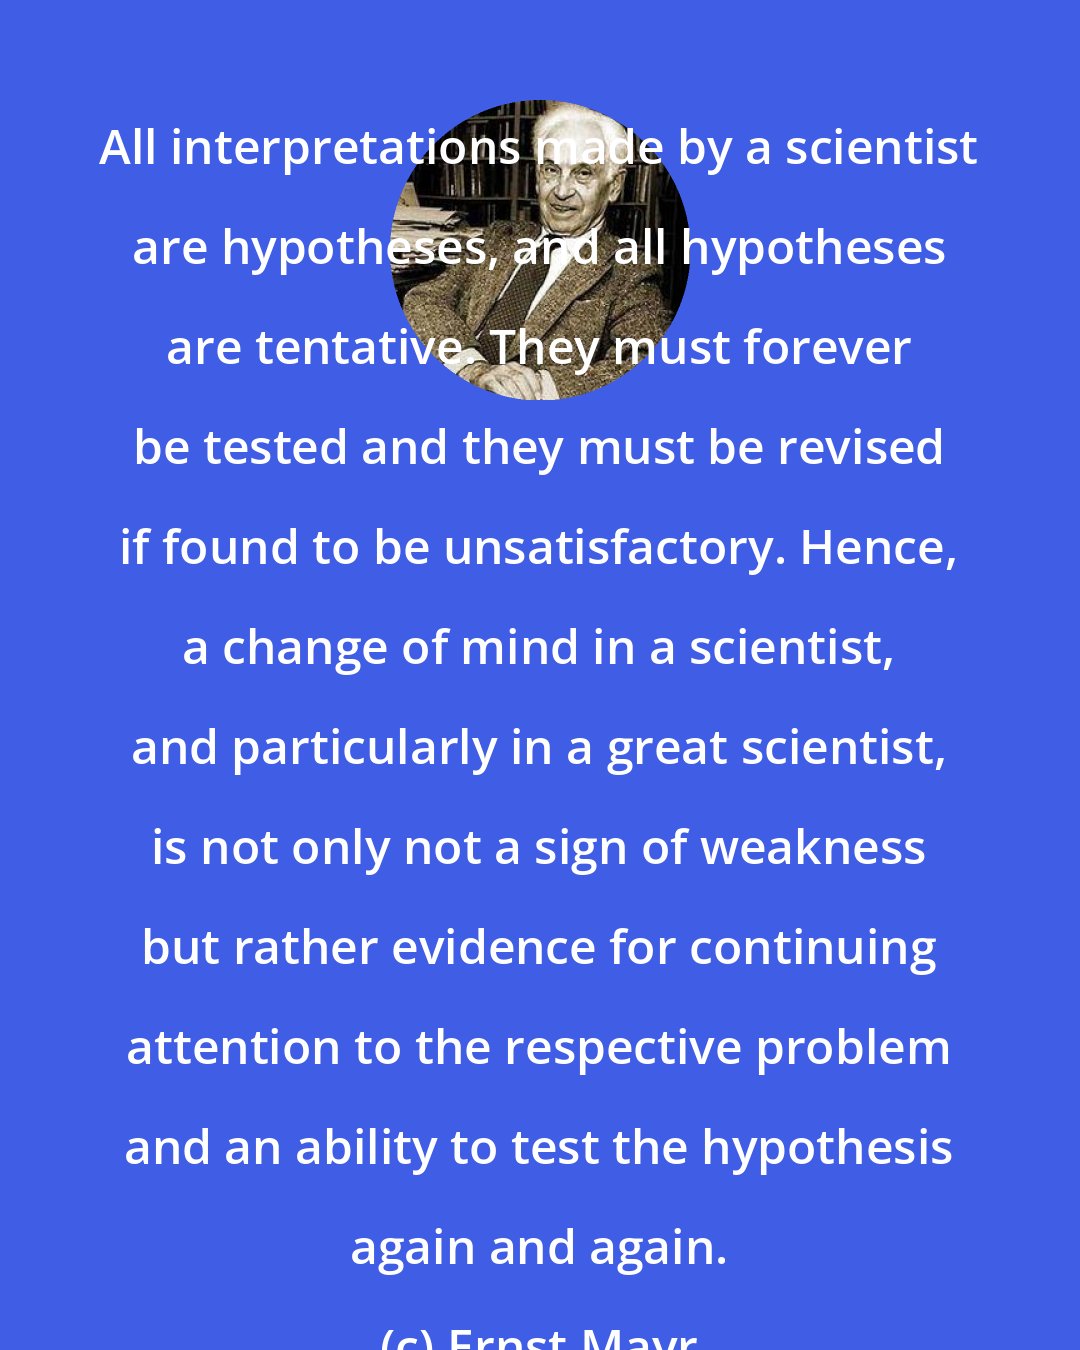 Ernst Mayr: All interpretations made by a scientist are hypotheses, and all hypotheses are tentative. They must forever be tested and they must be revised if found to be unsatisfactory. Hence, a change of mind in a scientist, and particularly in a great scientist, is not only not a sign of weakness but rather evidence for continuing attention to the respective problem and an ability to test the hypothesis again and again.